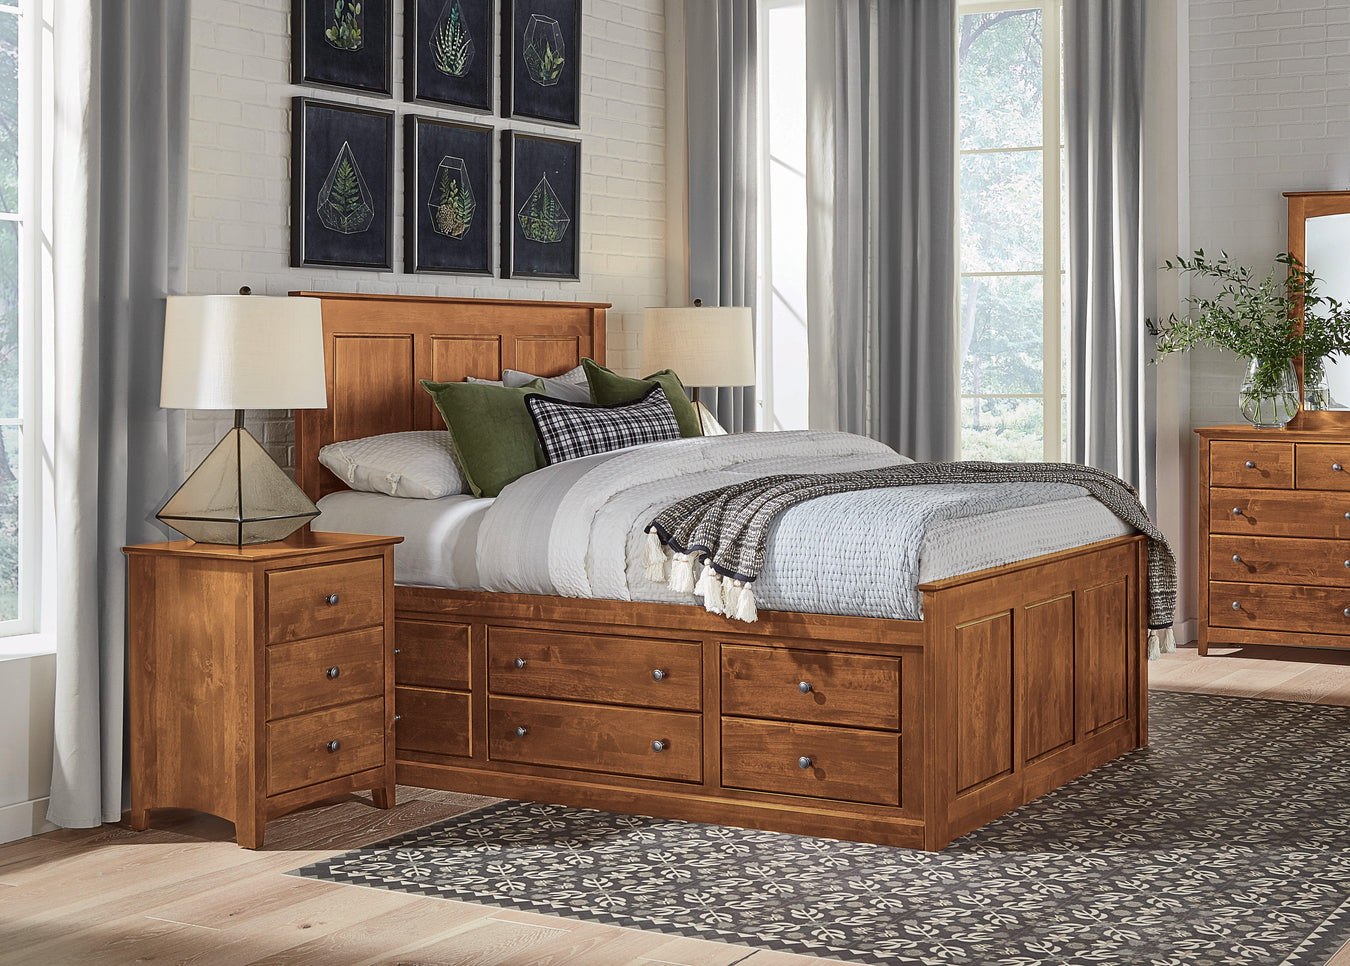 Shaker Storage Bed Collection